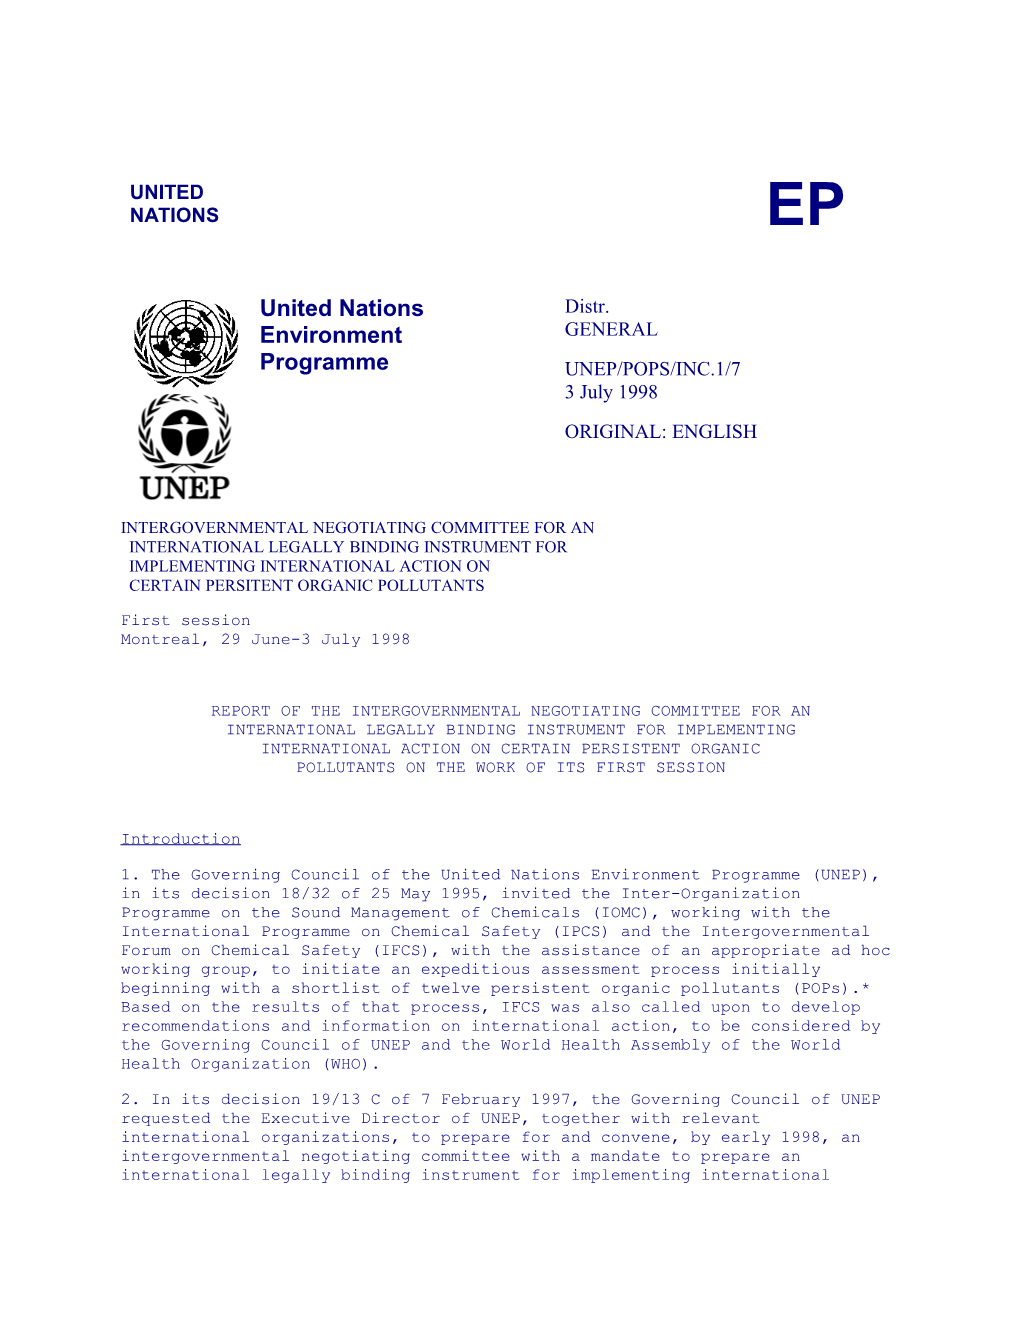 UNEP/POPS/INC.1/7 - Final Report in English